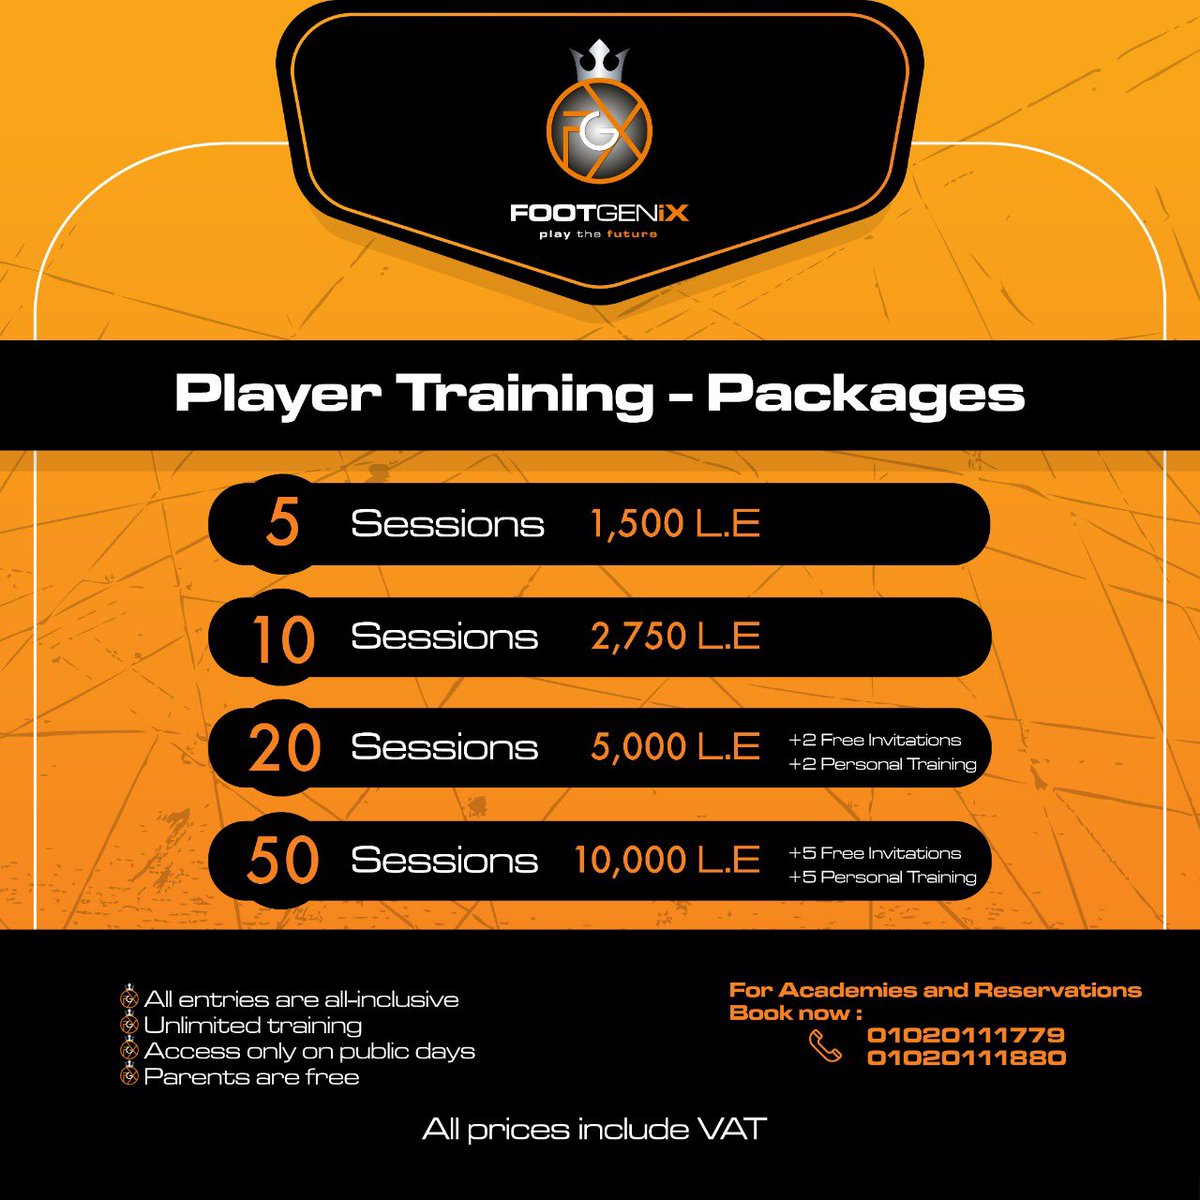 FOOTGENiX Player Training Packages Prices; Change your game by changing the way you train 🏟⚽️🟠⚫️ 

#playthefuture #football #footballchallenge￼￼￼ #footballgame #footballfacility #egypt #footballtraining #cognitivetraining #passthepower #inspirethepassion #footballtraining